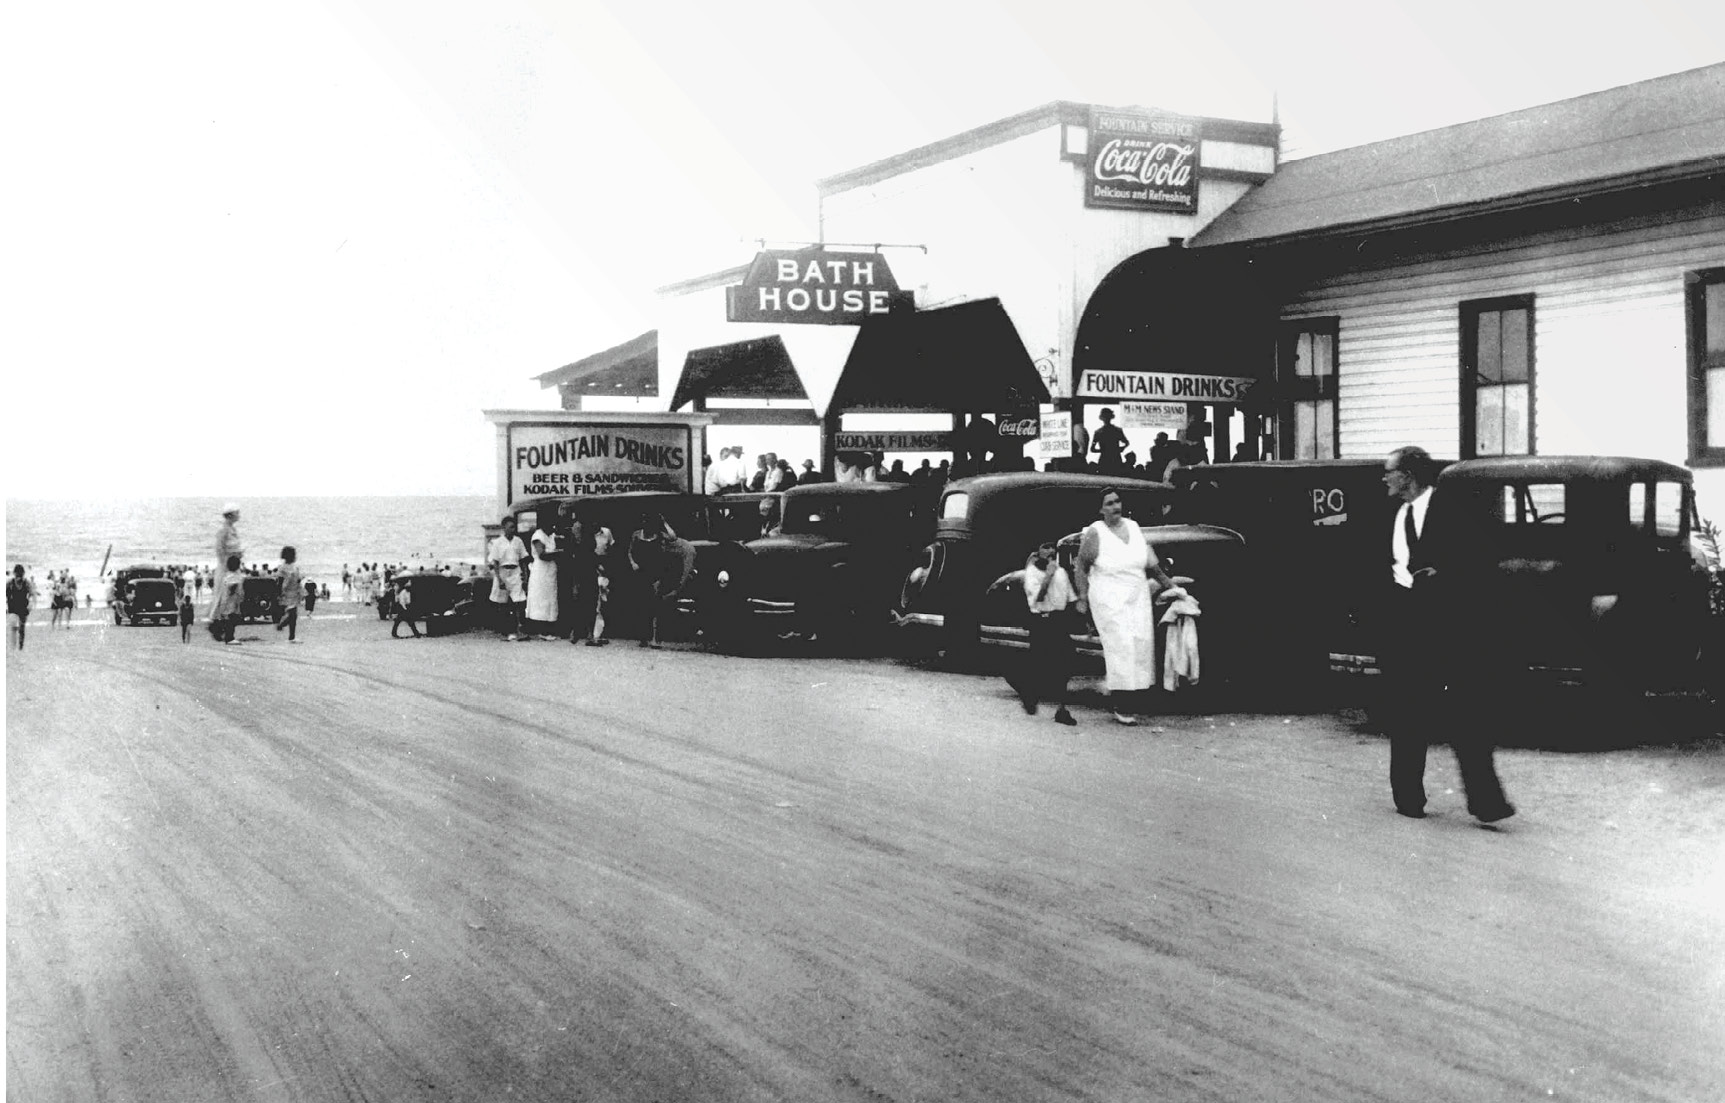 Even in the 1930s, the end of Center Street at Folly epitomized fun in the sun, a carefree place dubbed the “Edge of America.”